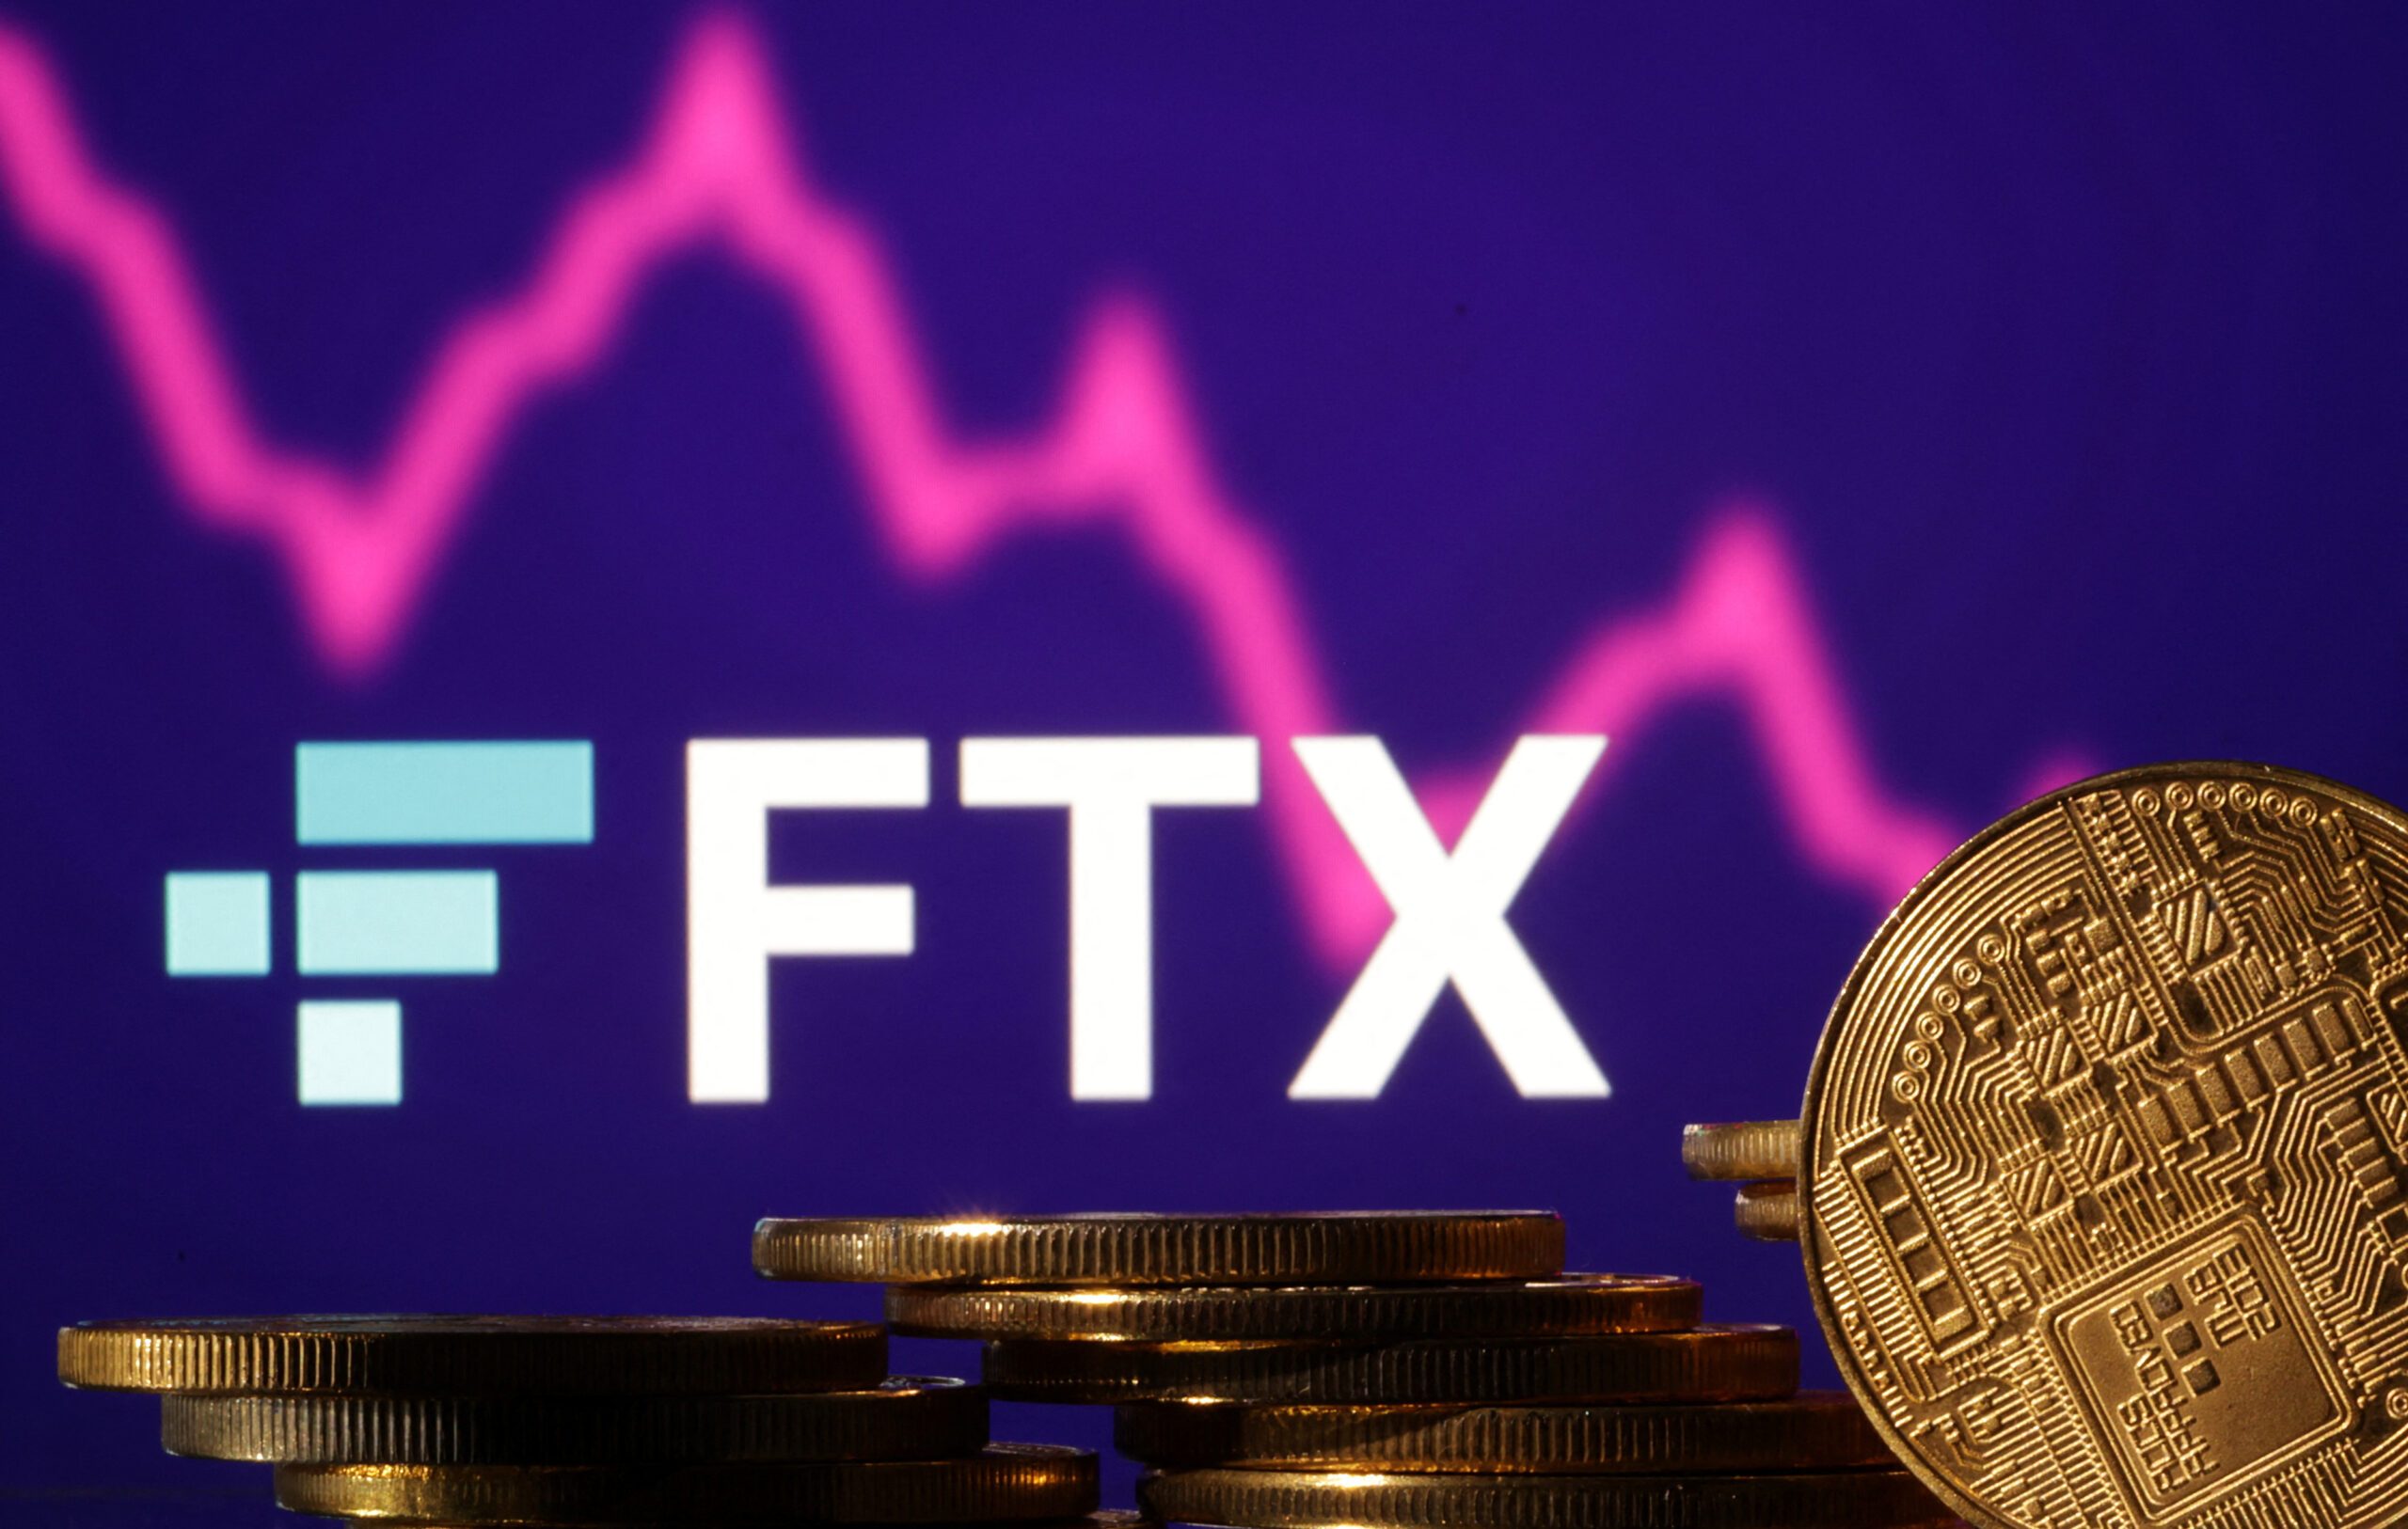 EXPLAINER: The fall of FTX and what it means for crypto